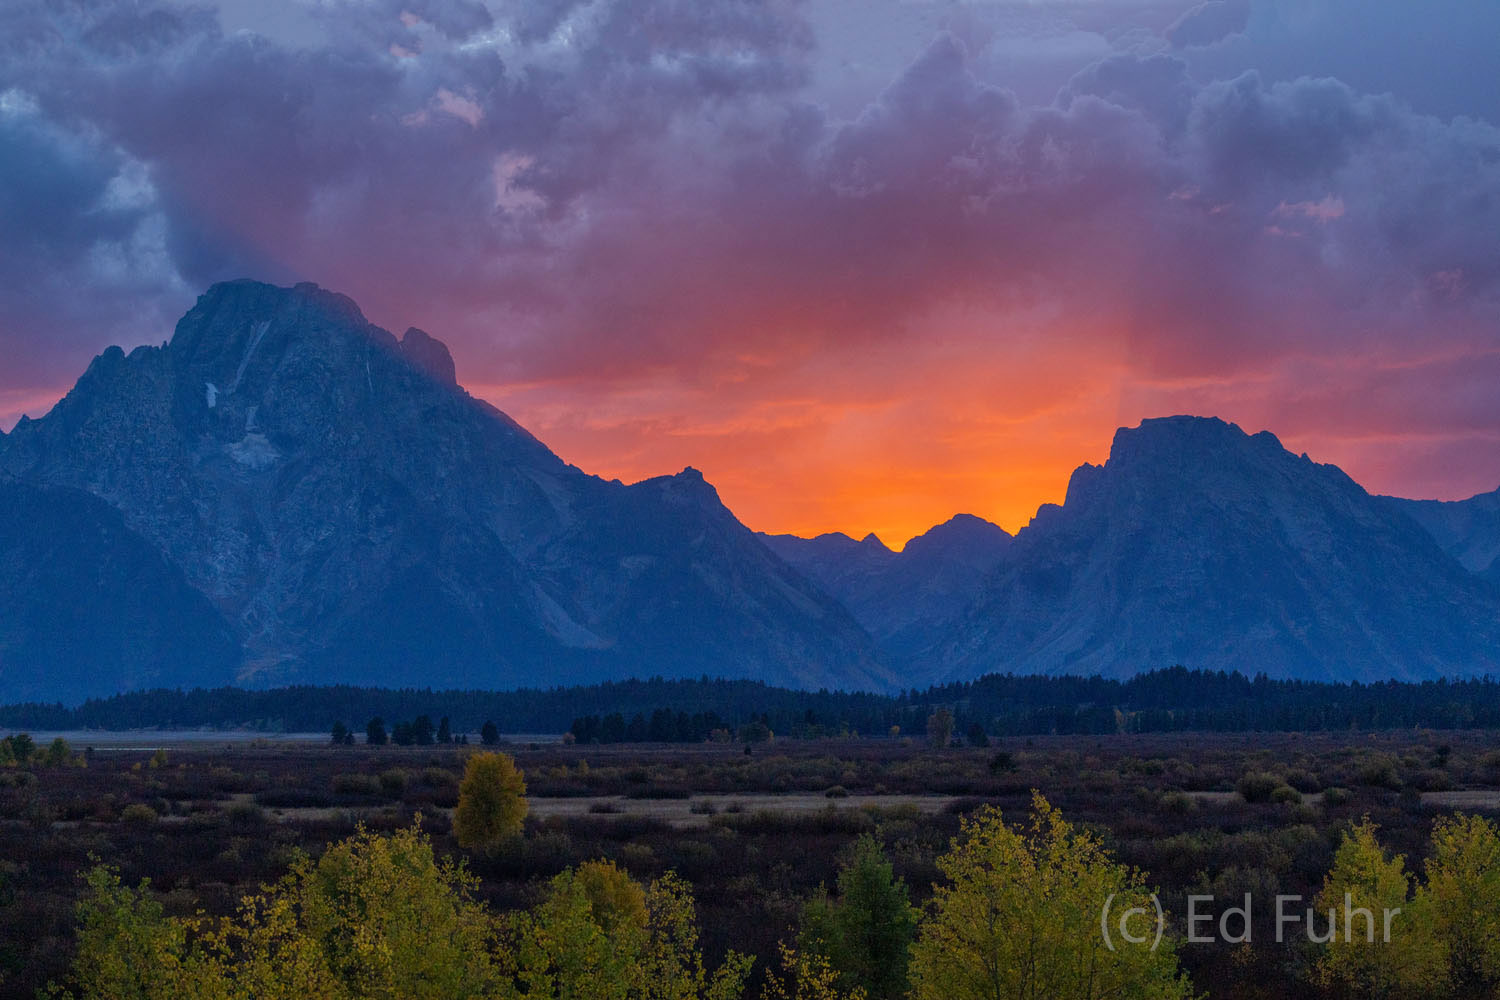 A powerful afternoon thunderstorm has hovered over the Tetons' highest peaks.  As the sun approaches the horizon an orange glow...